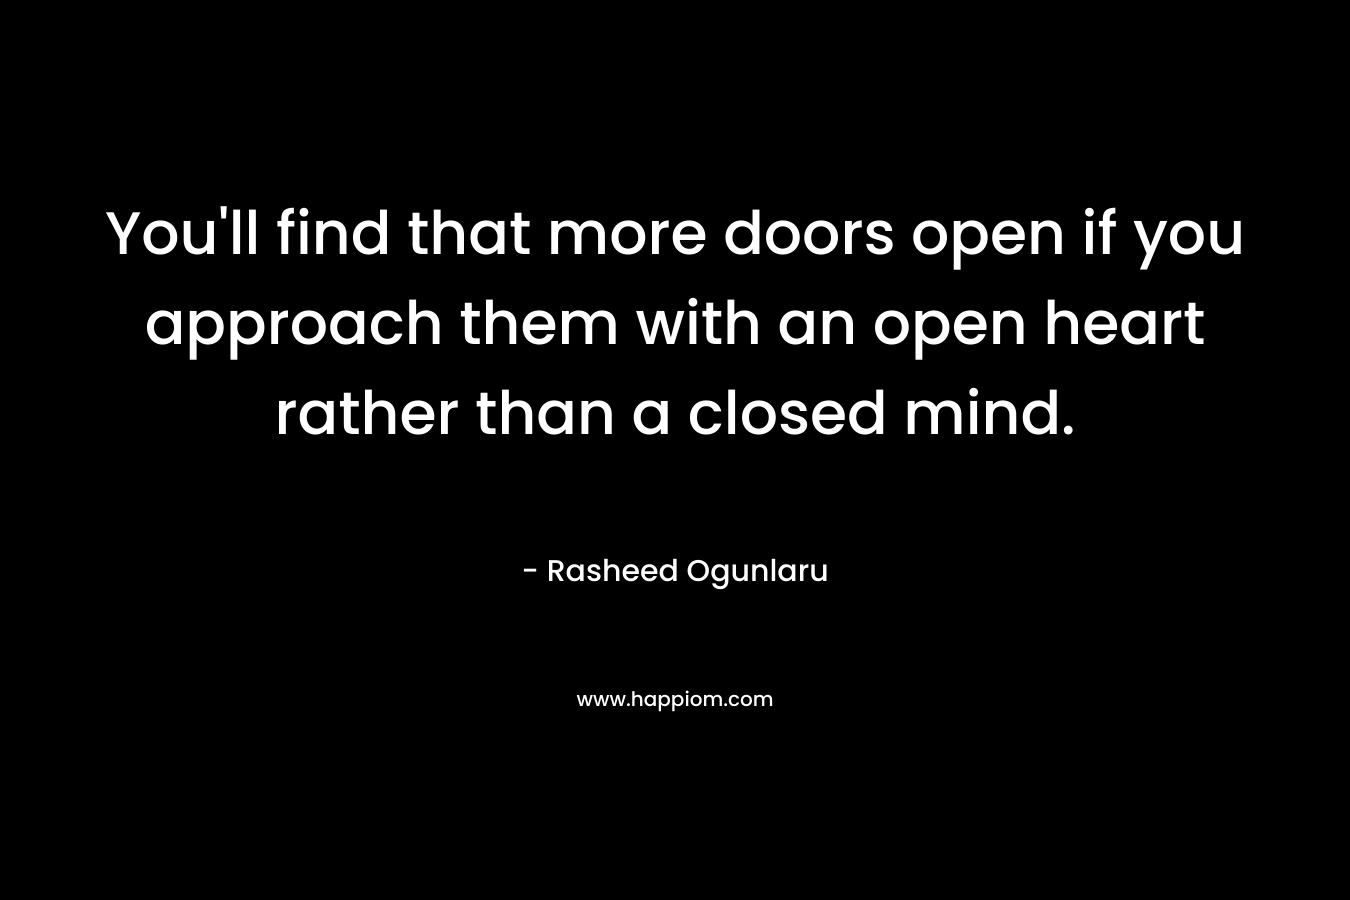 You'll find that more doors open if you approach them with an open heart rather than a closed mind.